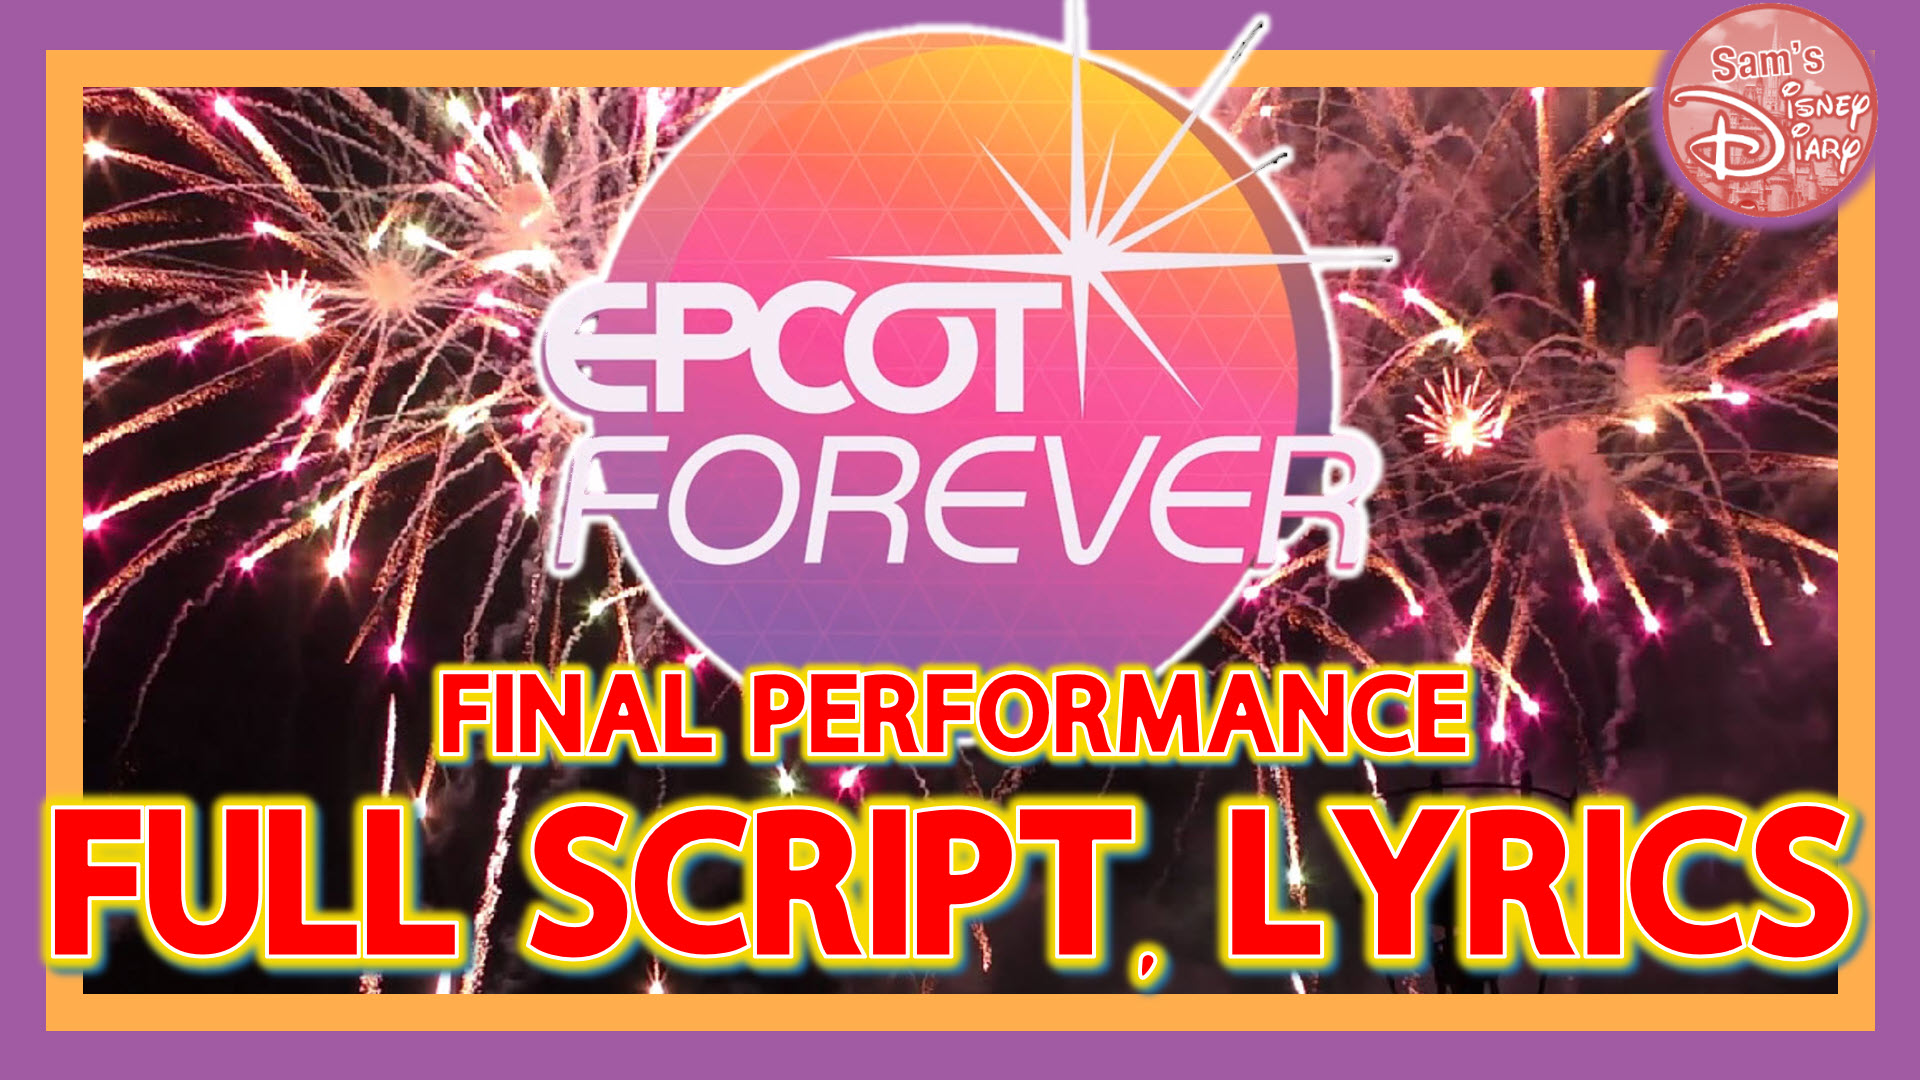 The Final Farewell: The Last Epcot Forever - Exclusive with Lyrics and Script! 🌐✨